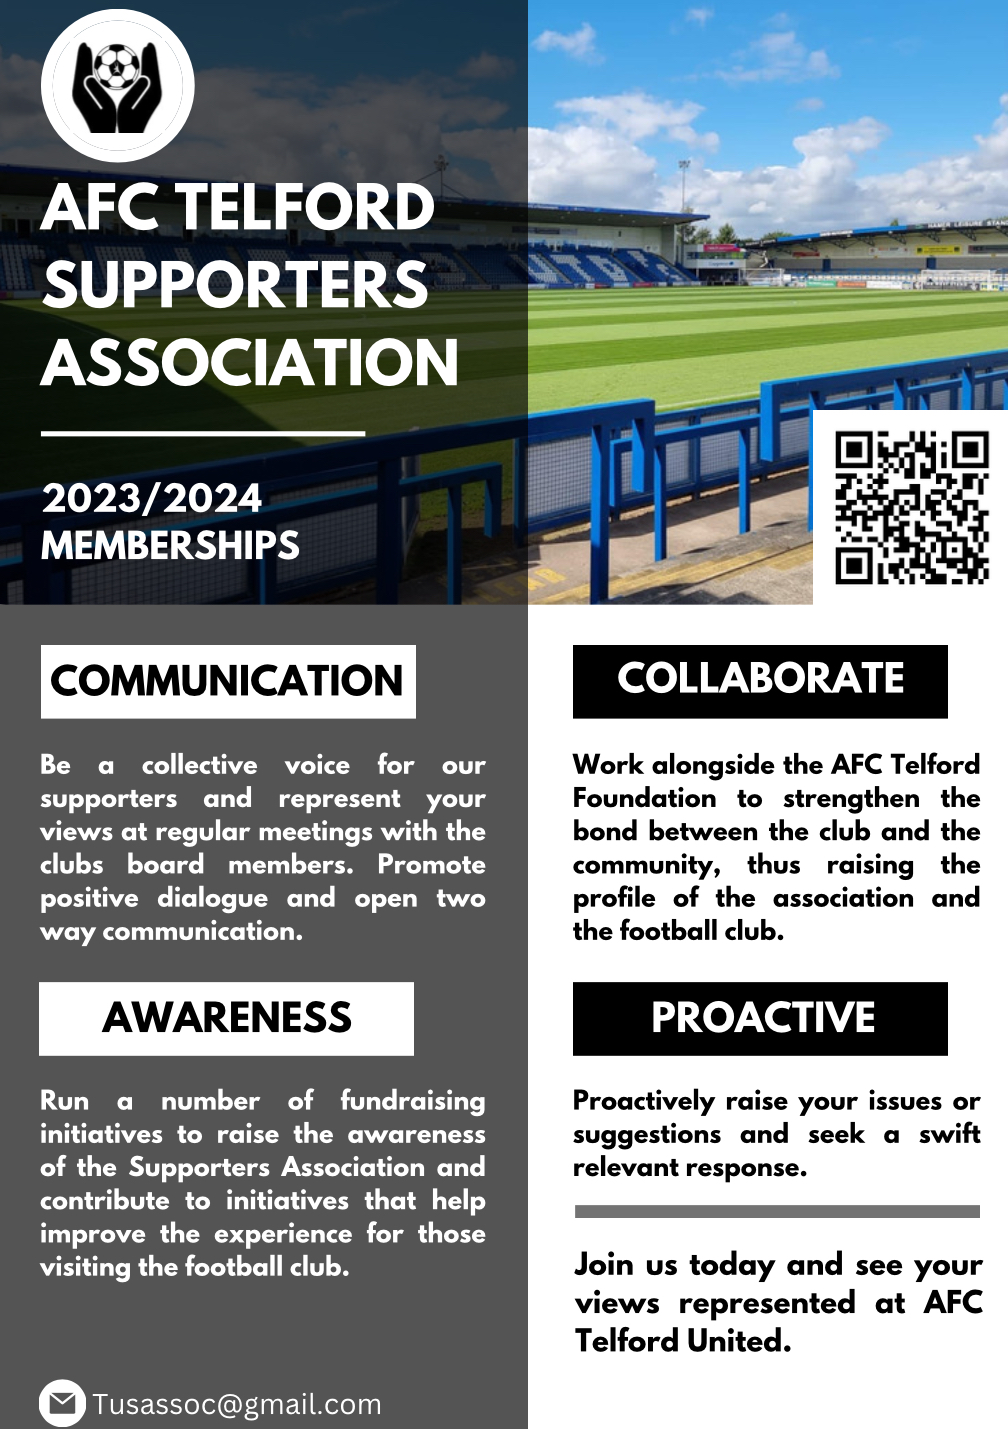 Supporters Association Memberships 23/24